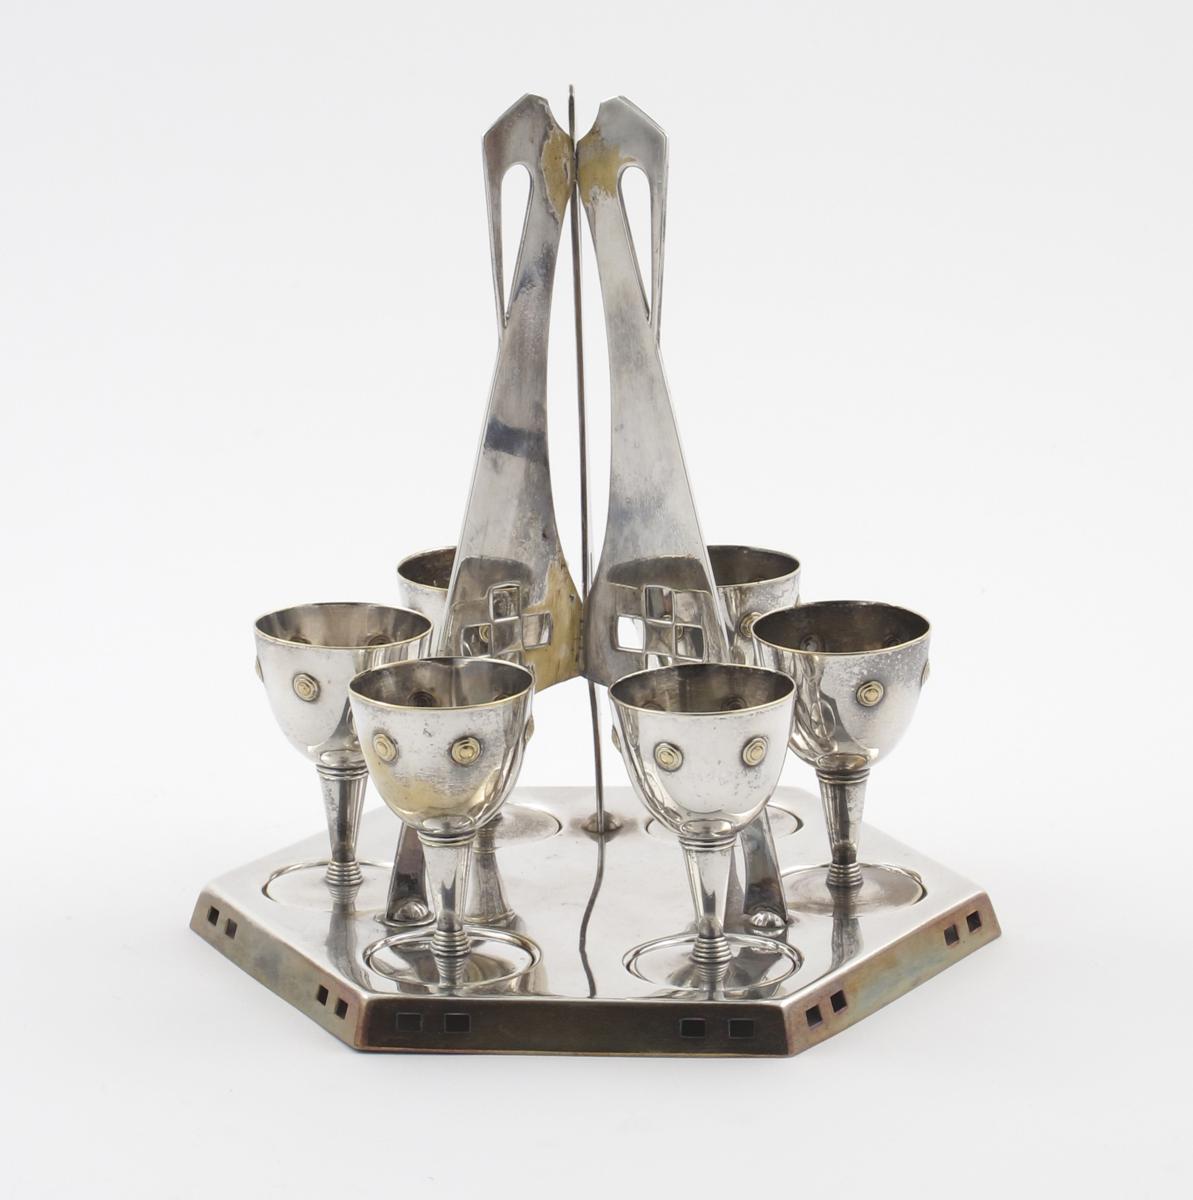 A W.M.F Secessionist electroplated egg tray and six cups, with pierced and stamped geometric